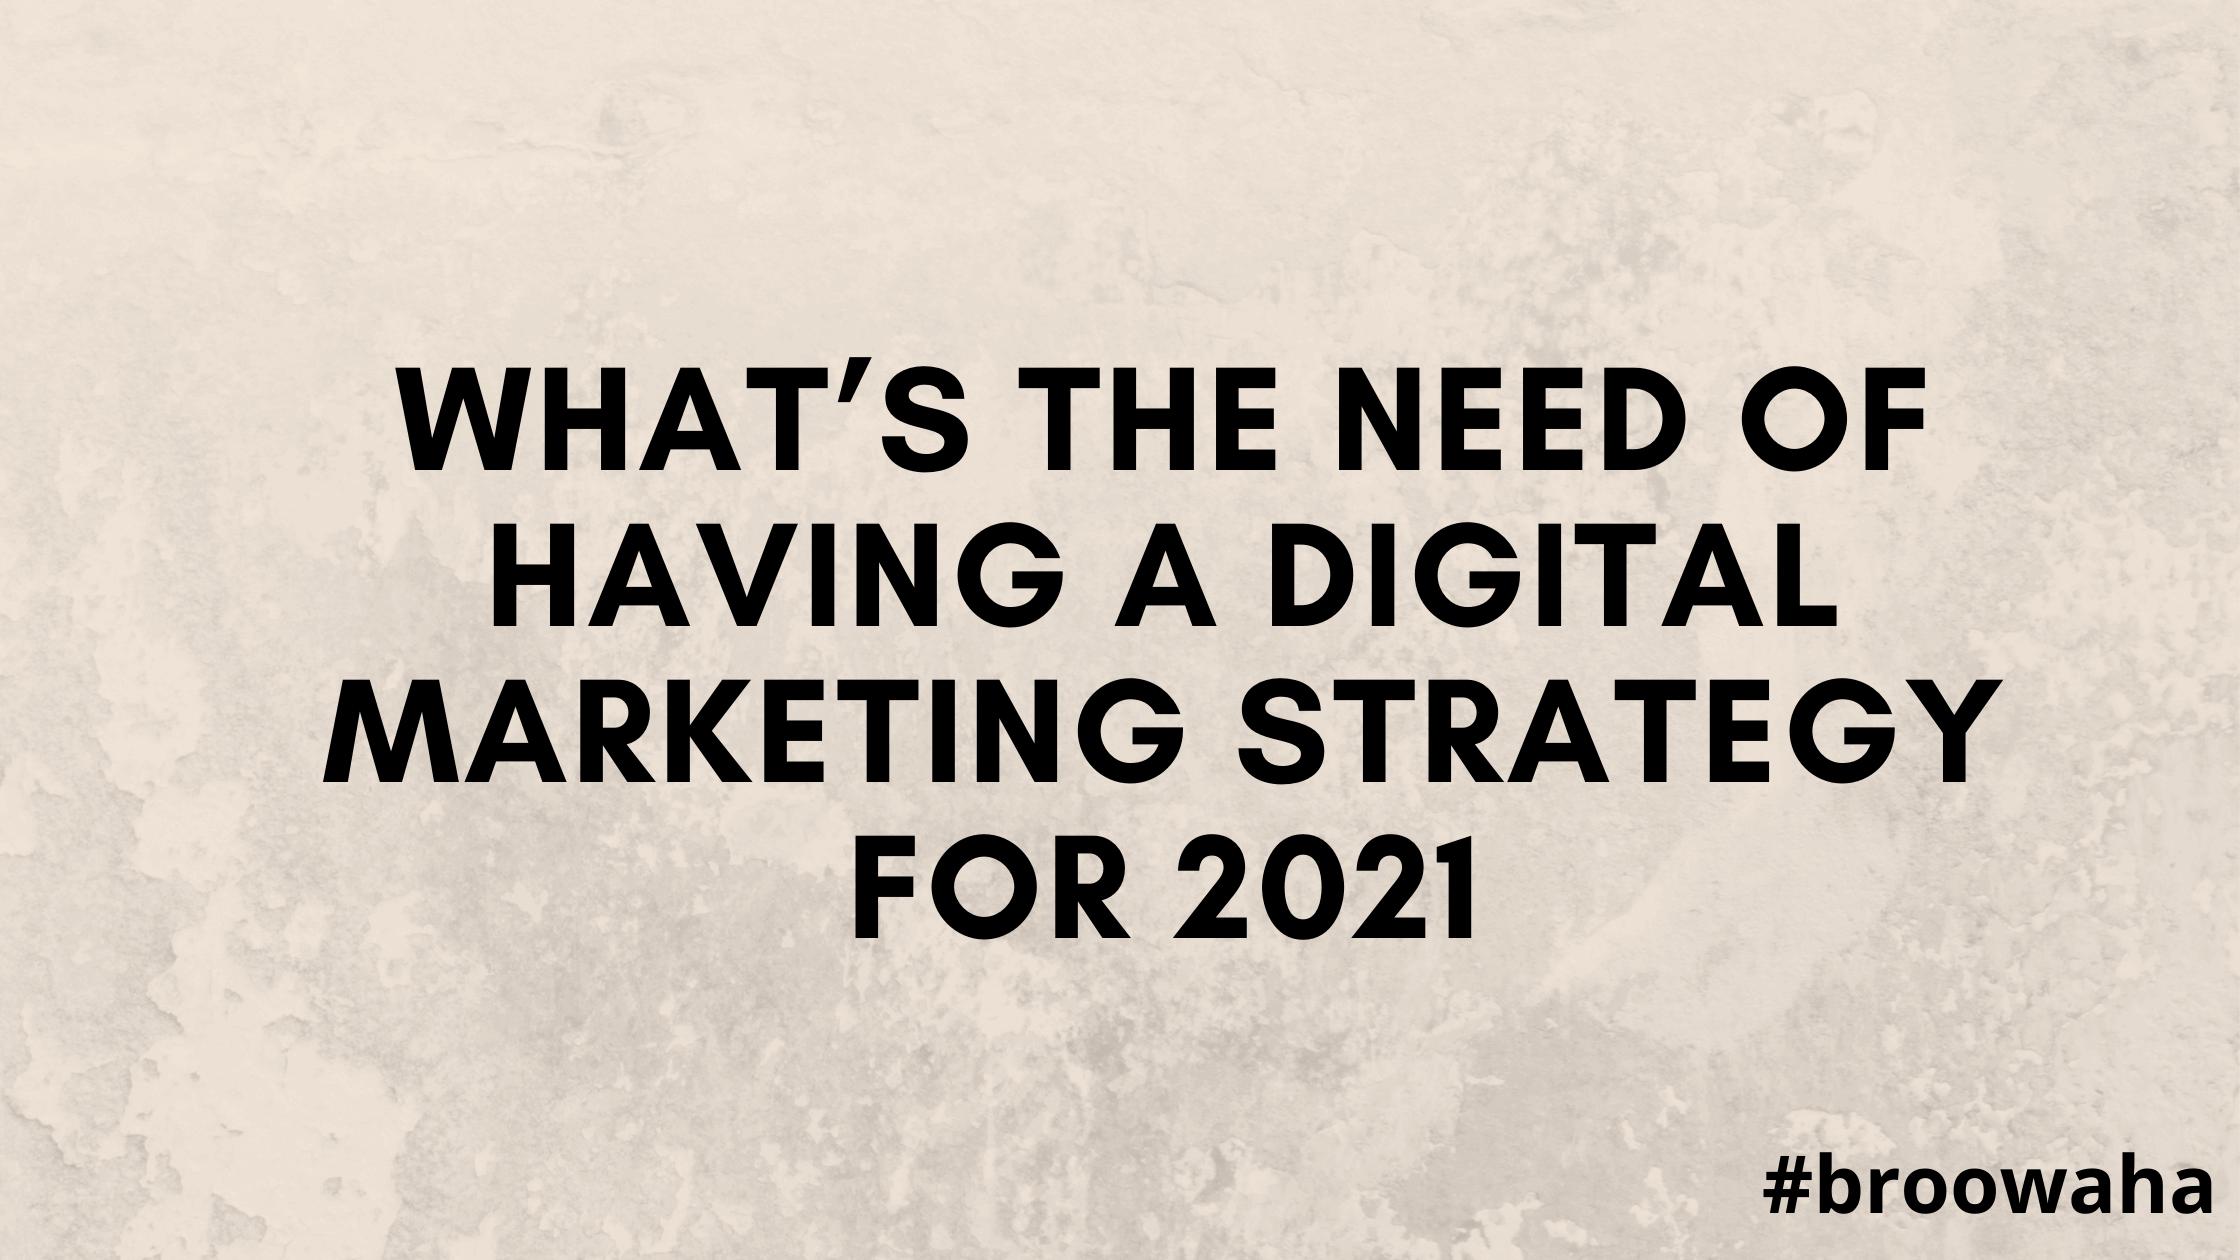 What's the need of having a digital marketing strategy for 2021